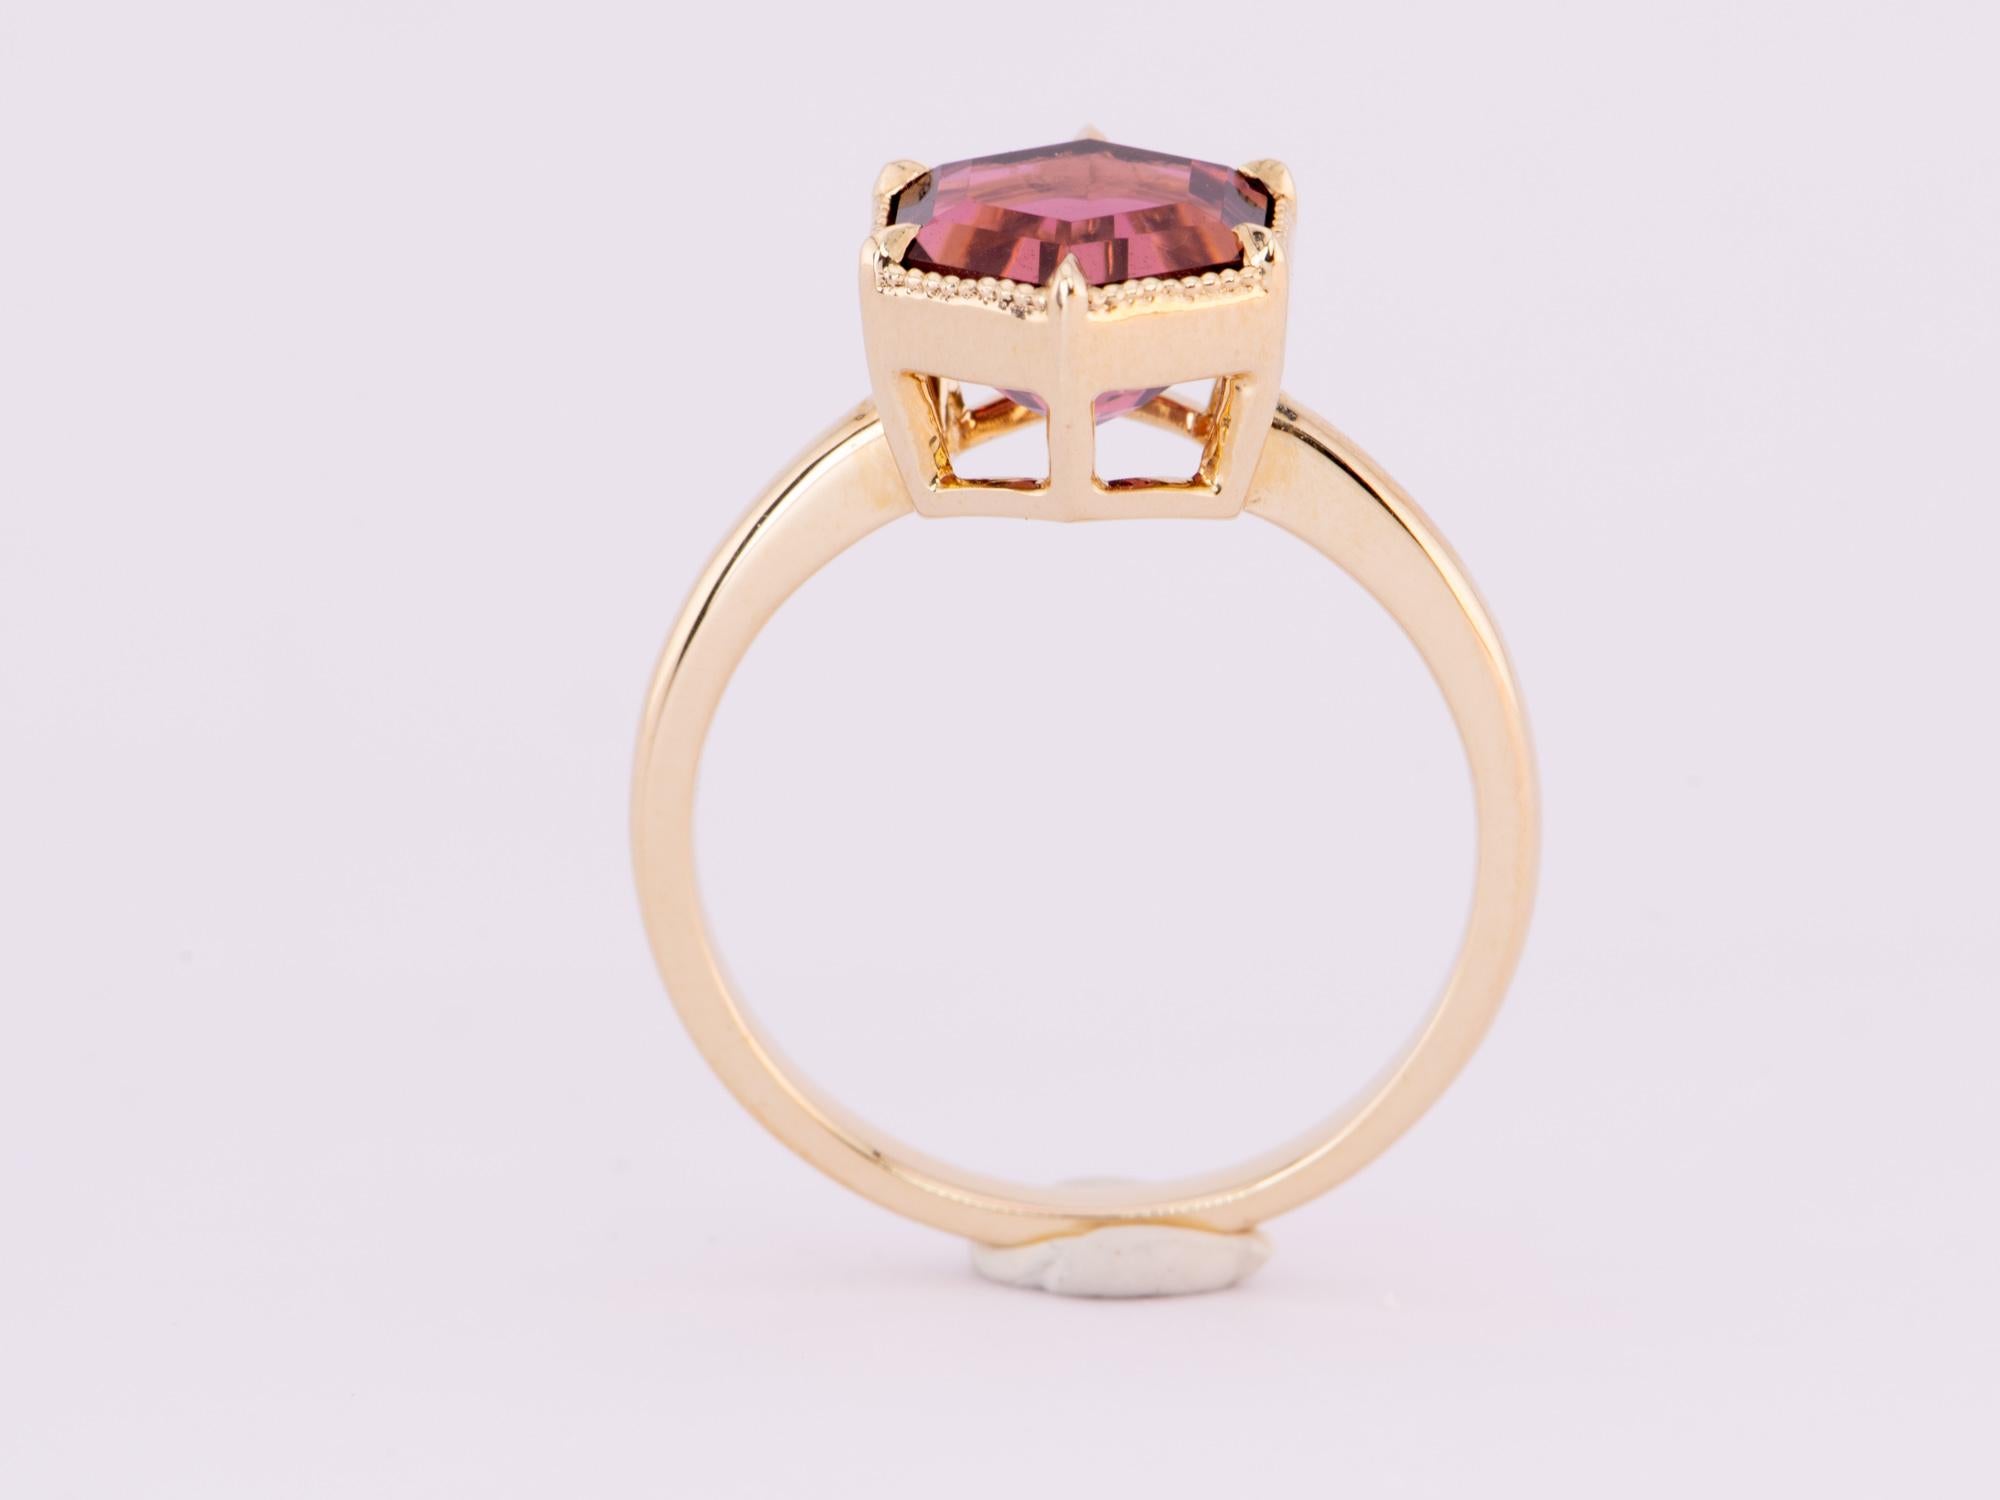 3.12ct Hexagon Rubellite Tourmaline Engagement Ring 14K Gold In New Condition For Sale In Osprey, FL